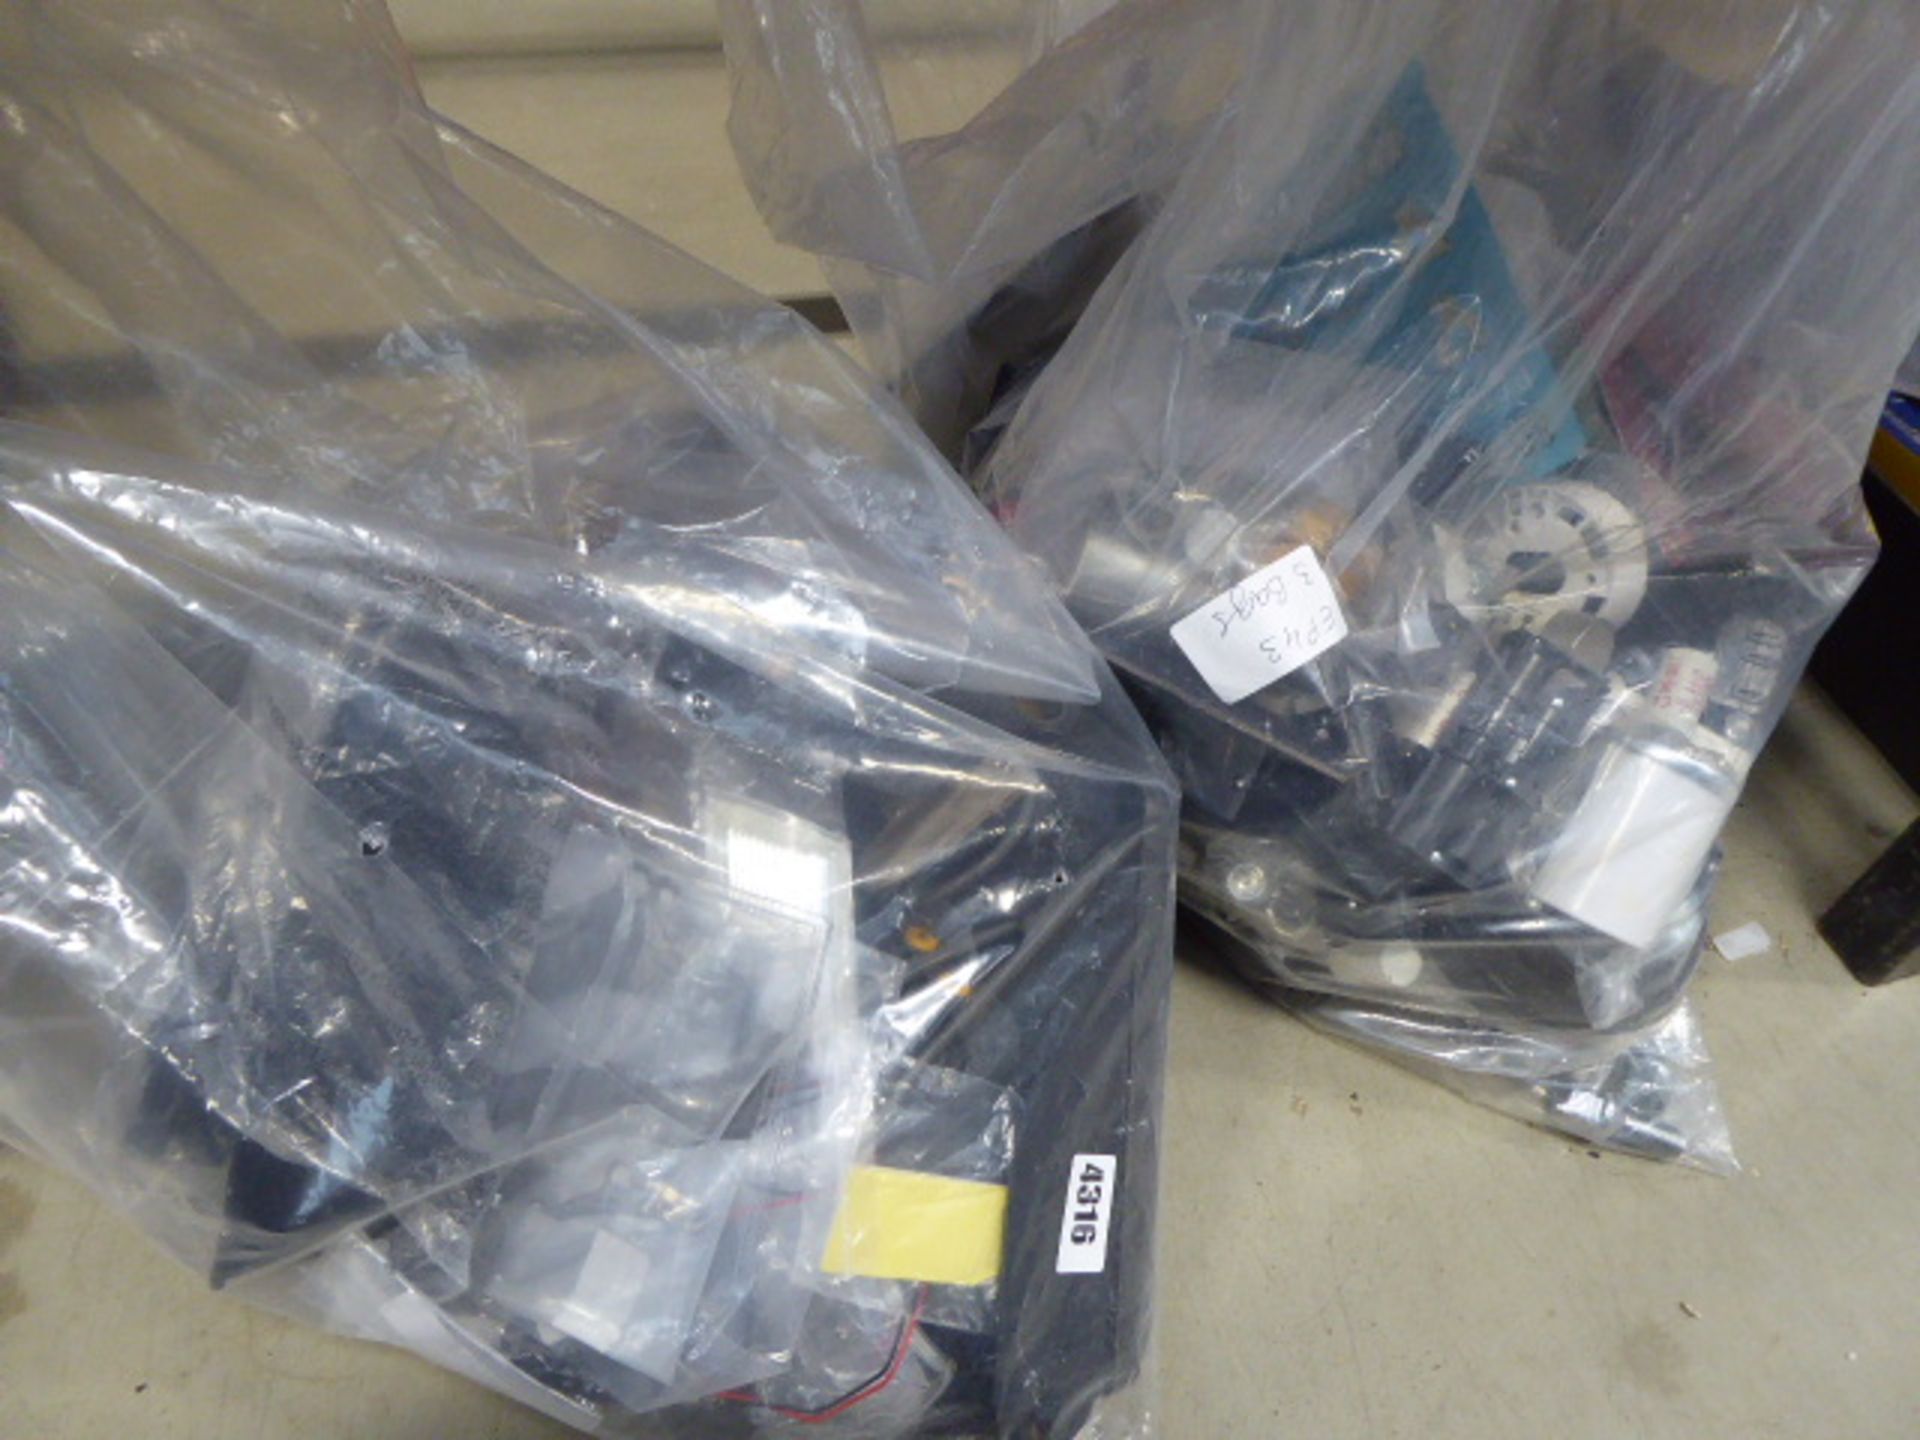 Three bags of various items including large fuses, lights, picture hooks, reflectors, car parts etc